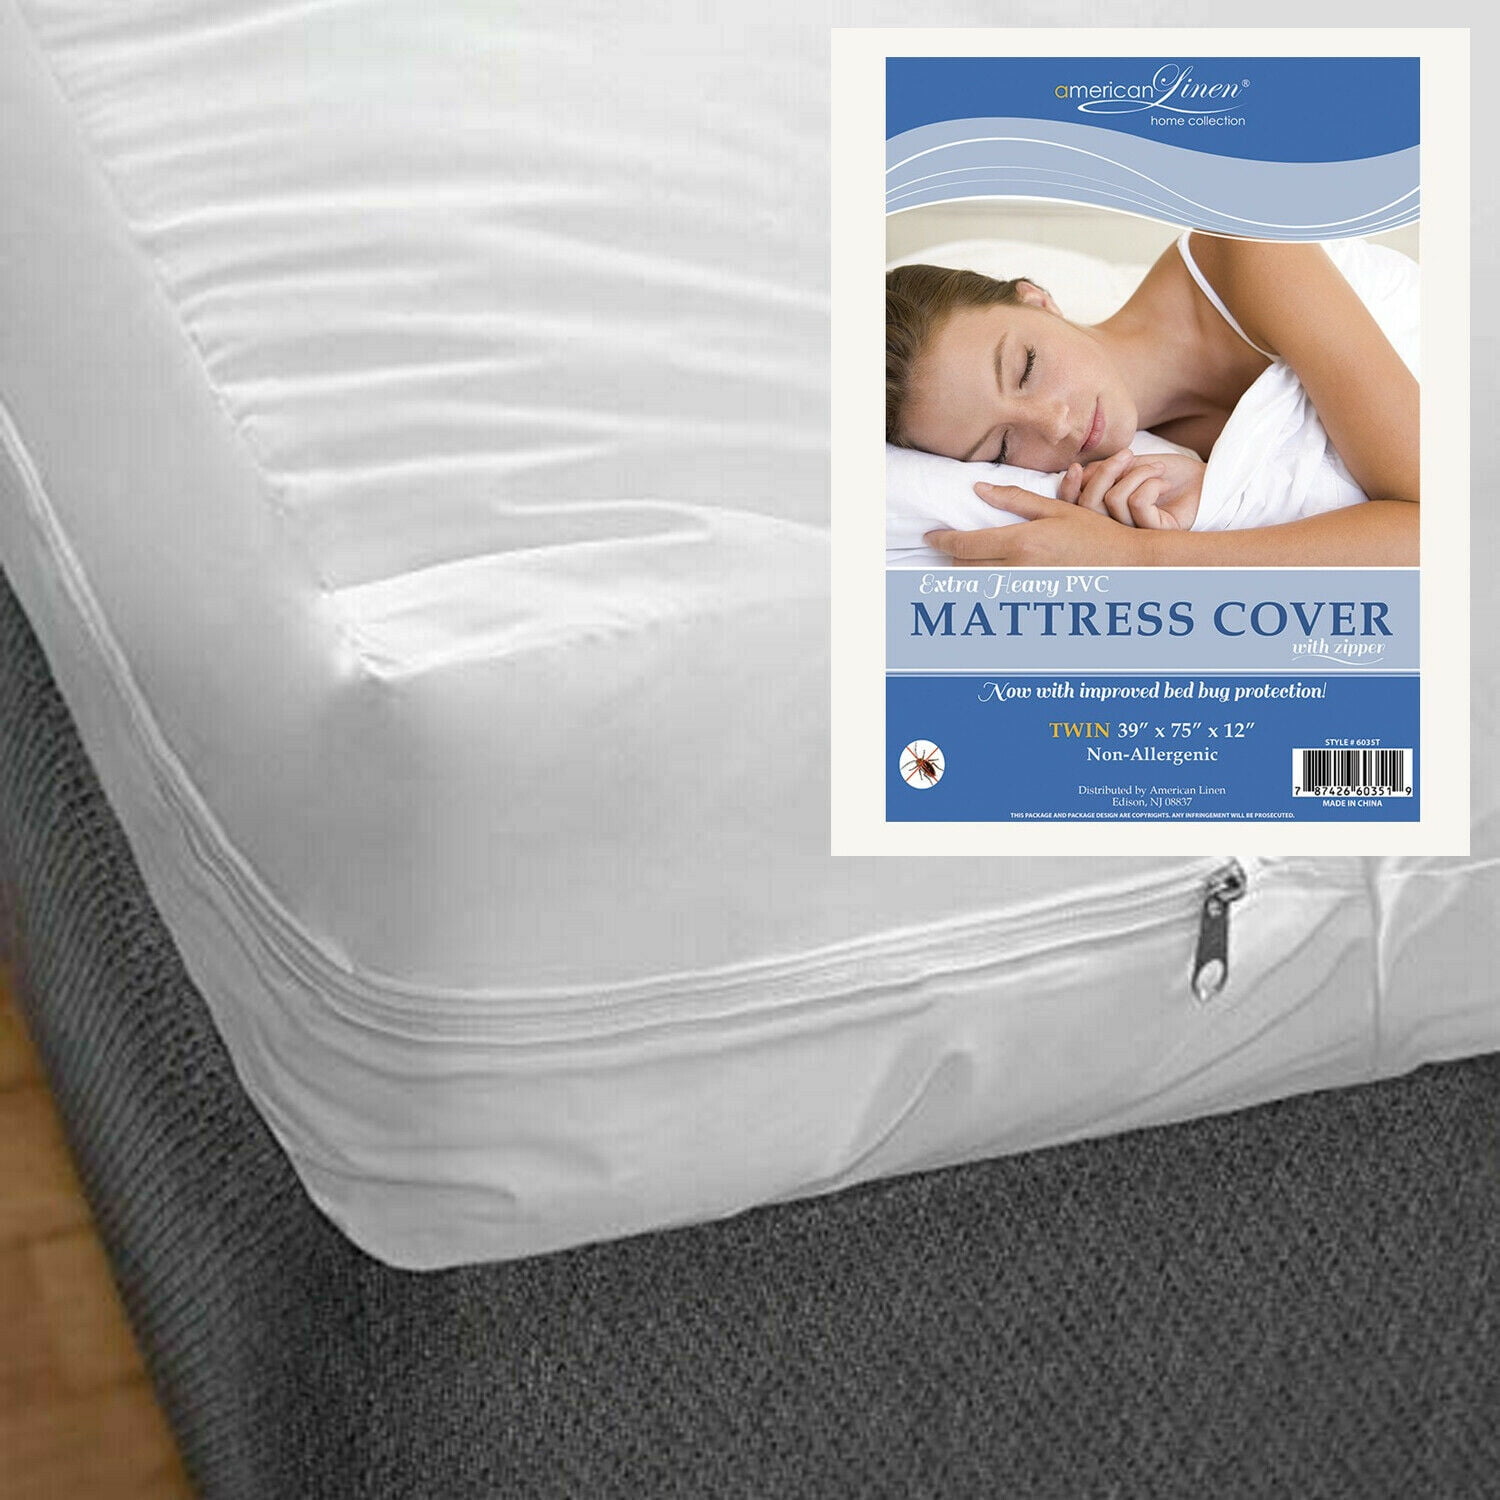 BED BUG PROTECTOR HYPOALLERGENIC QUEEN SIZE FABRIC ZIPPERED MATTRESS COVER 16" 